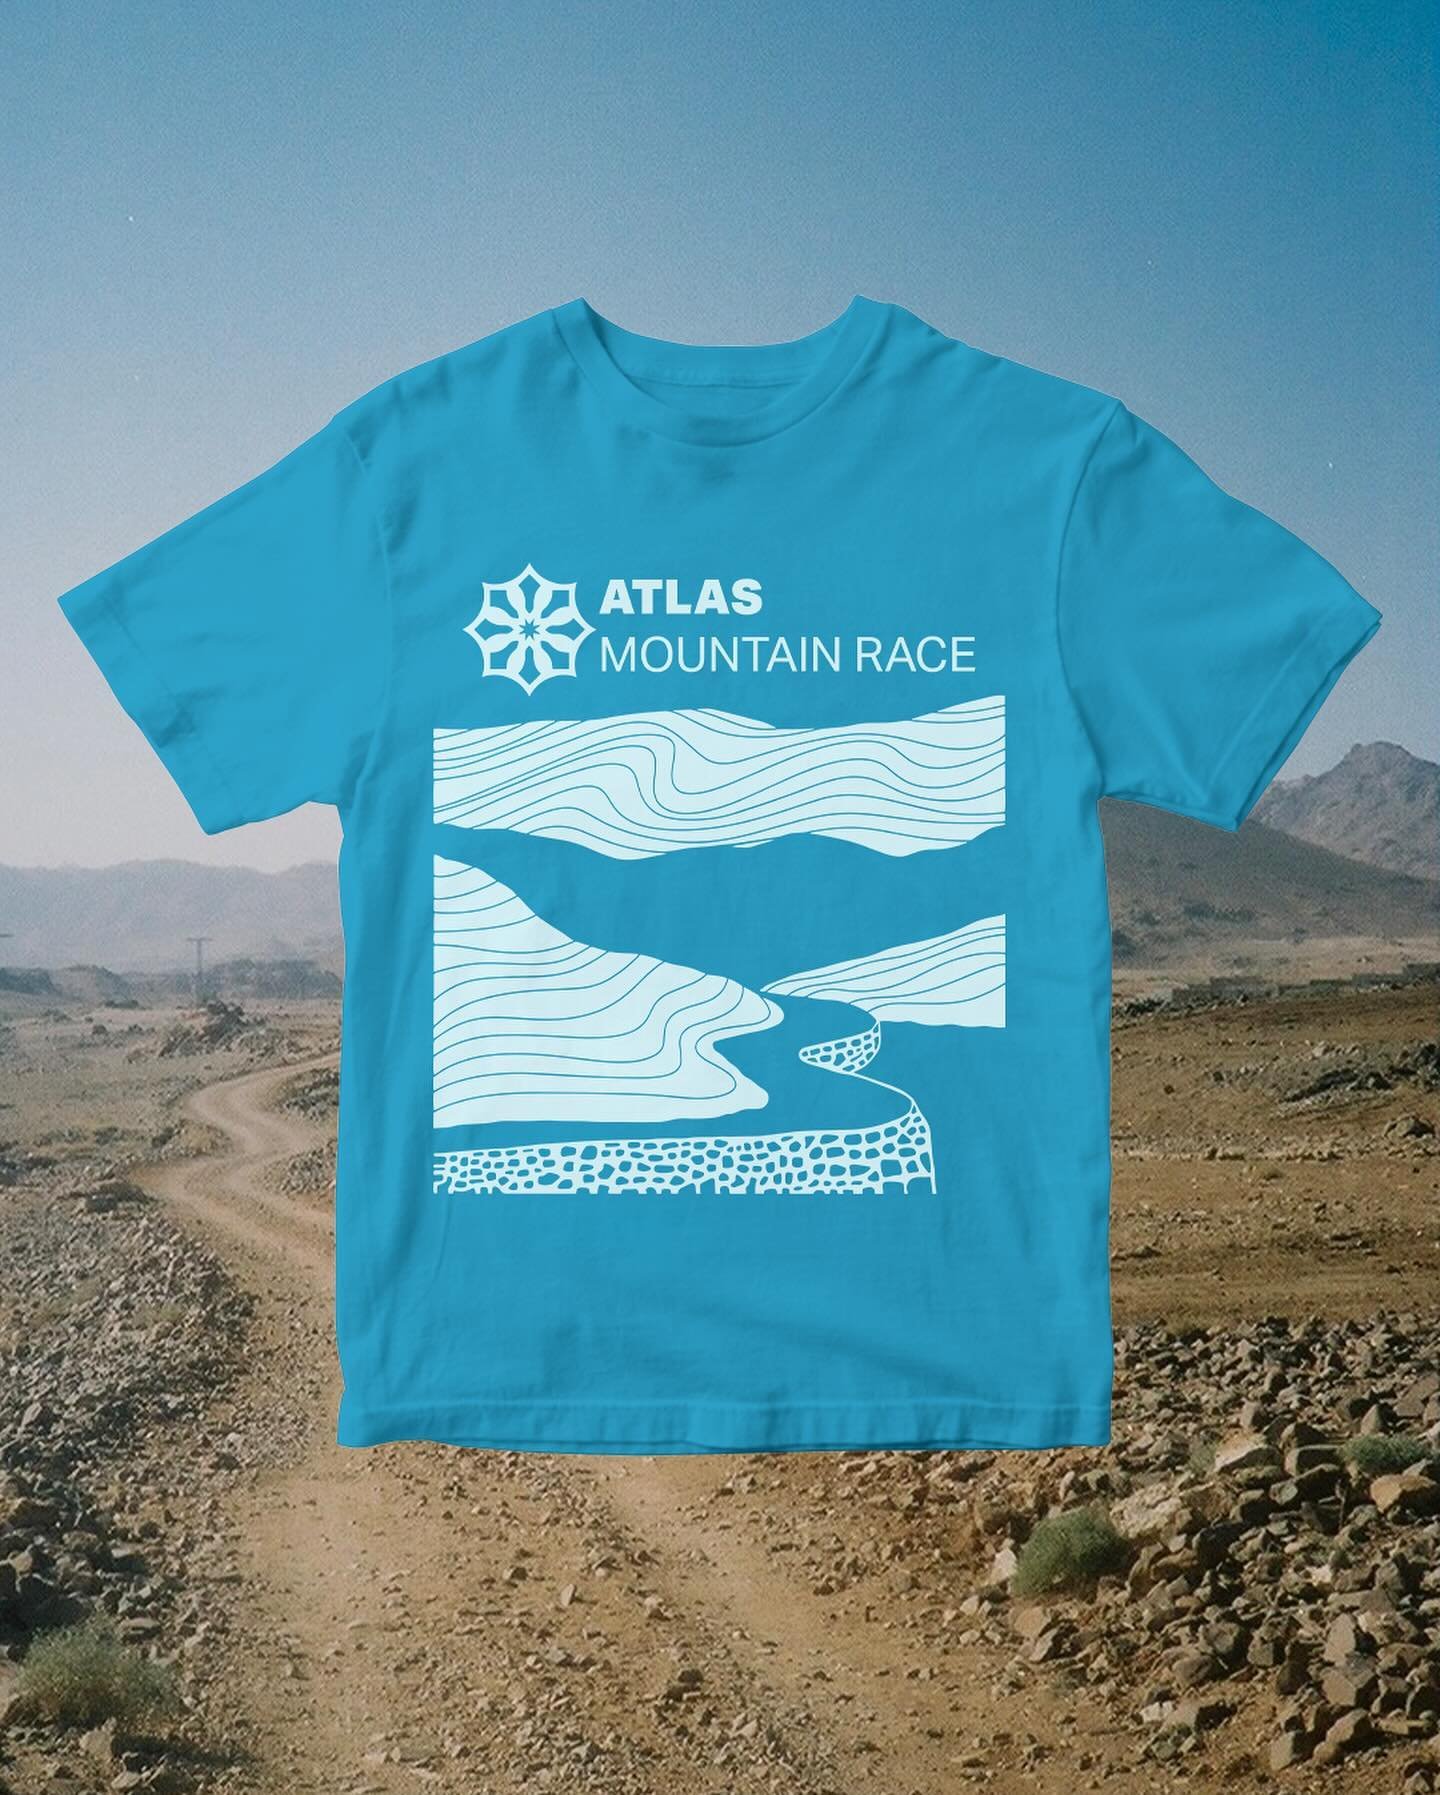 Finally getting round to showcasing some design work I did for this year&rsquo;s Atlas Mountain Race. 

𖤓 Event Shirt

Inspired by the iconic Old Colonial Road, a section of the route known to be as stunning as it is challenging. The design captures